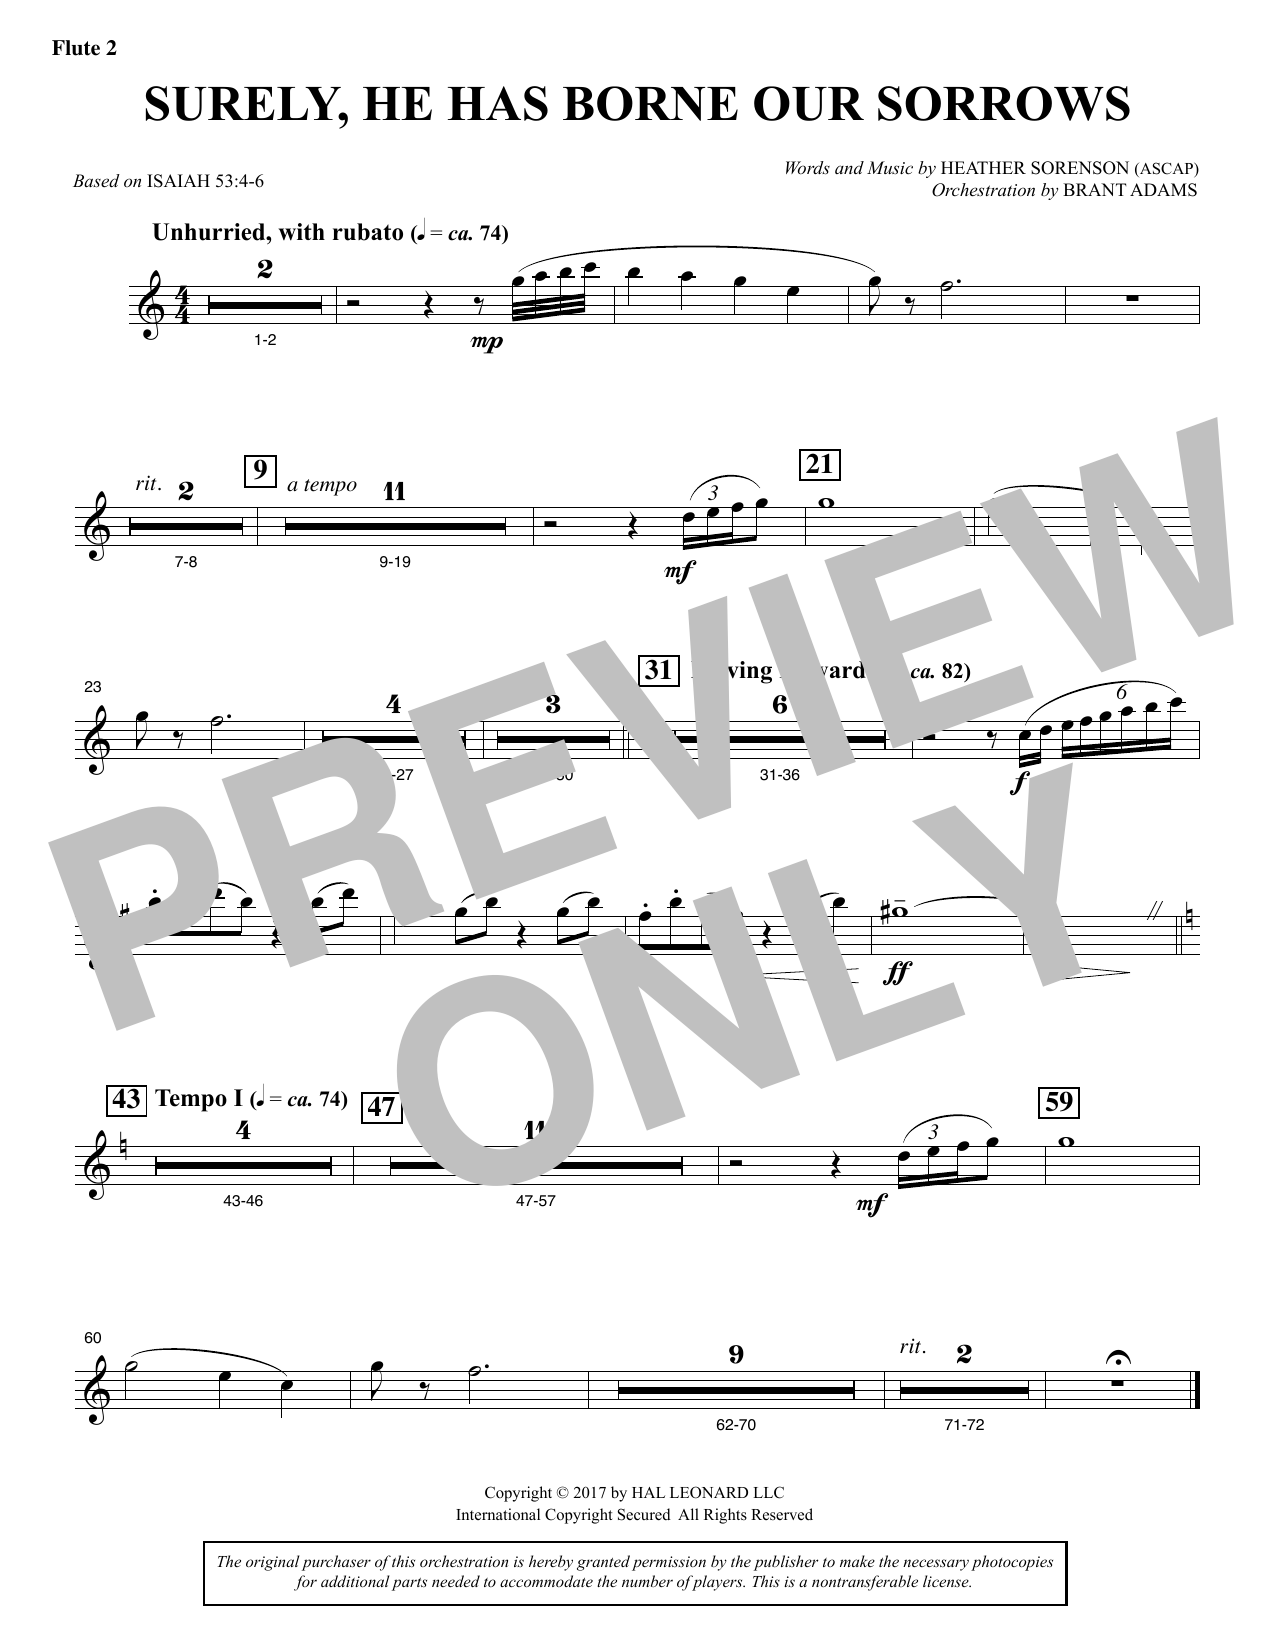 Download Heather Sorenson Surely, He Has Borne Our Sorrows - Flut Sheet Music